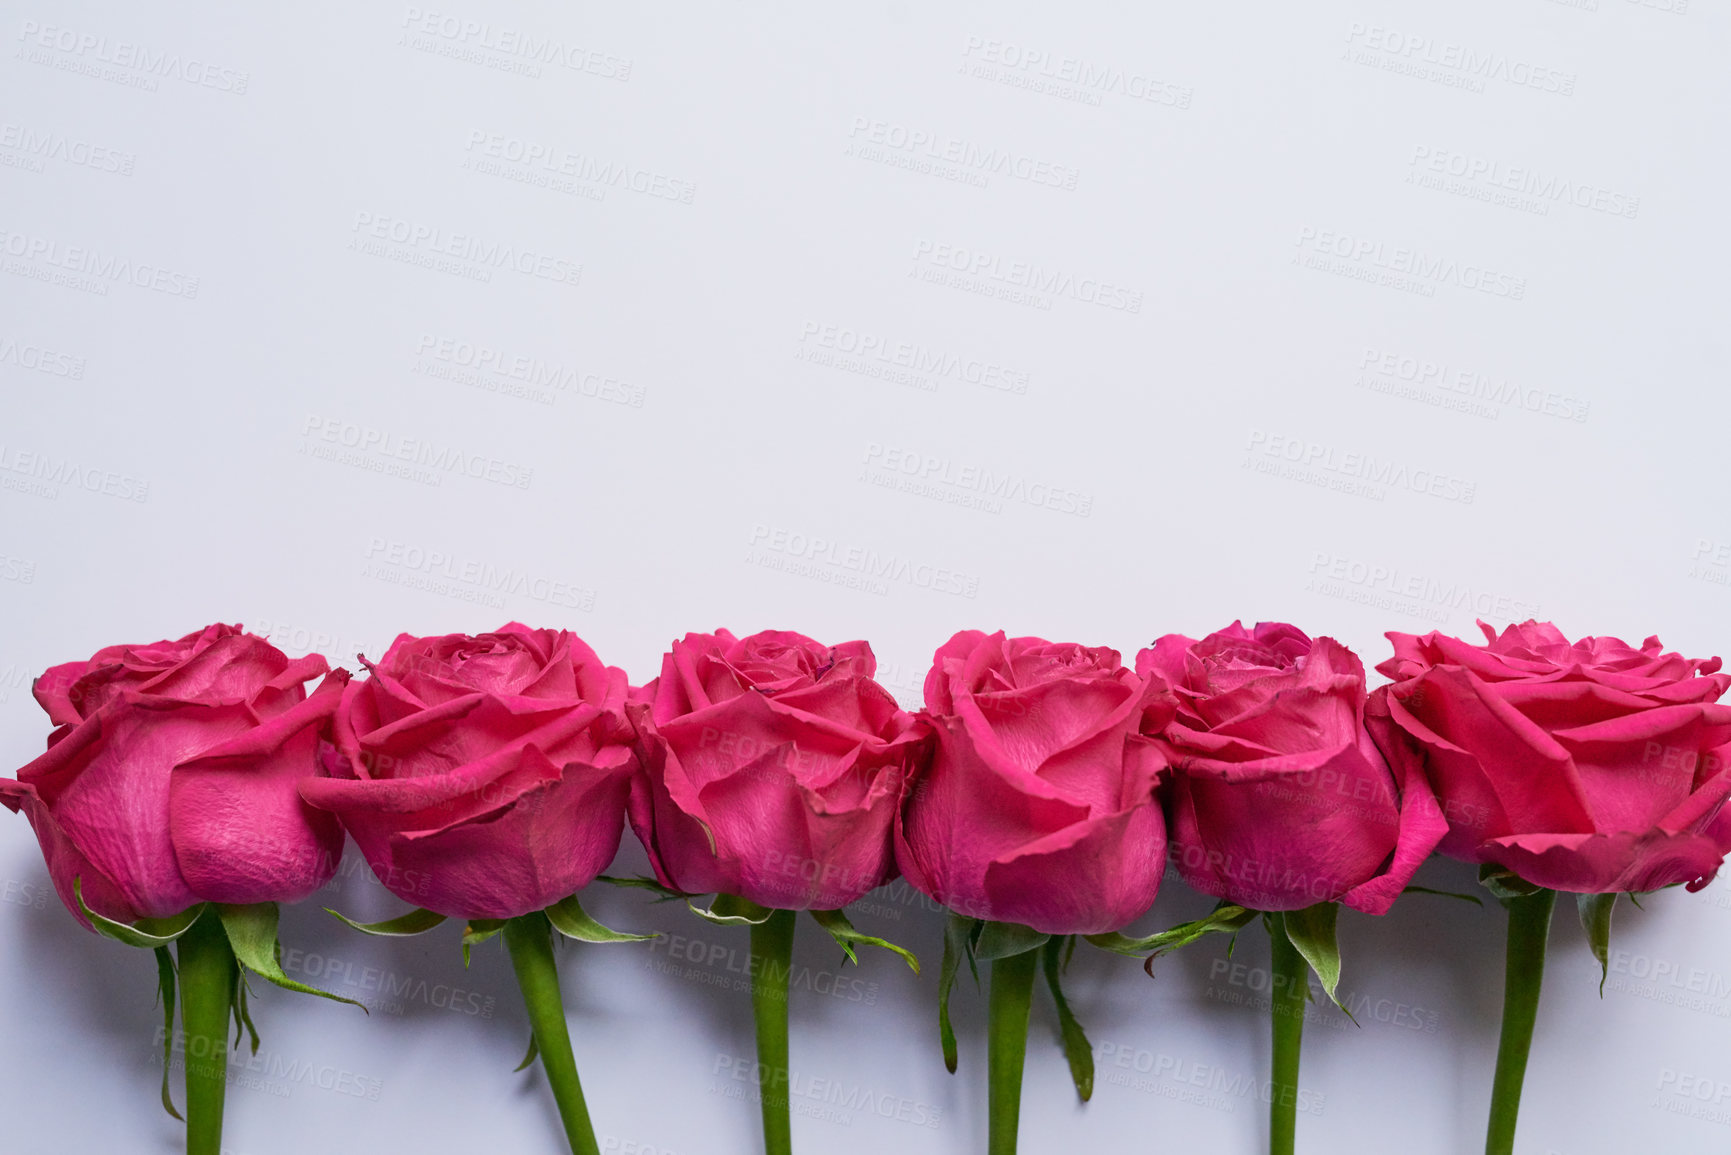 Buy stock photo Studio shot of a bouquet of pink roses lined up next to each other while resting against a grey background